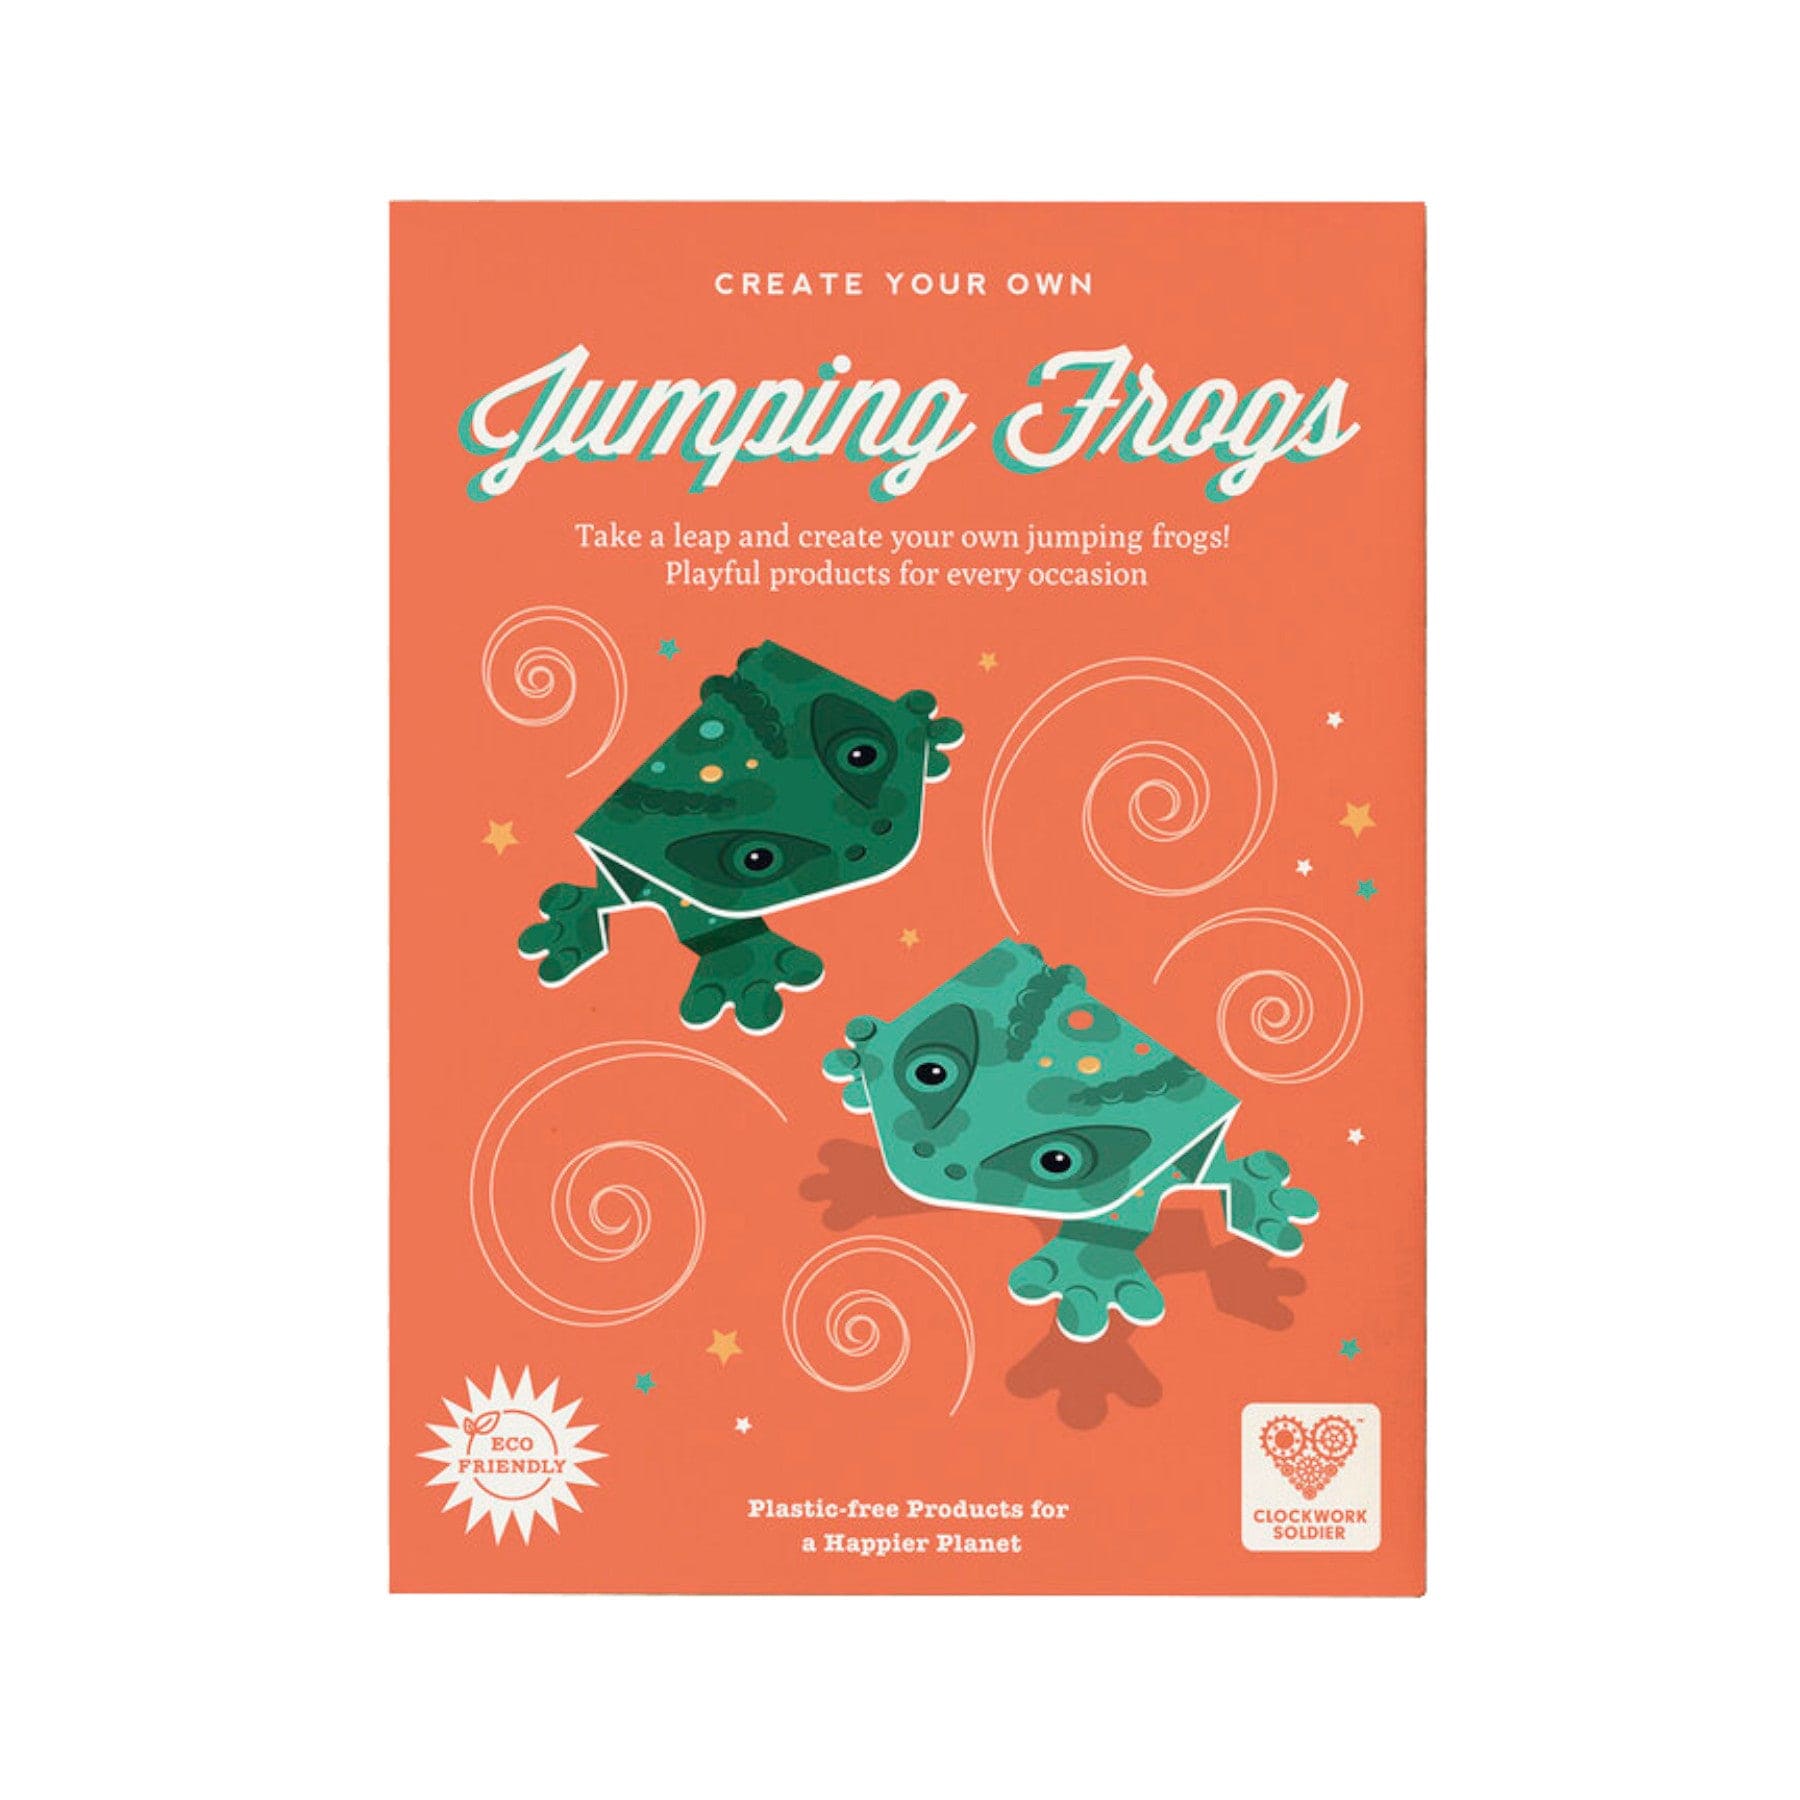 Eco-friendly Jumping Frogs craft kit packaging with playful green frogs illustration, 'Create Your Own' slogan, and plastic-free commitment badge.